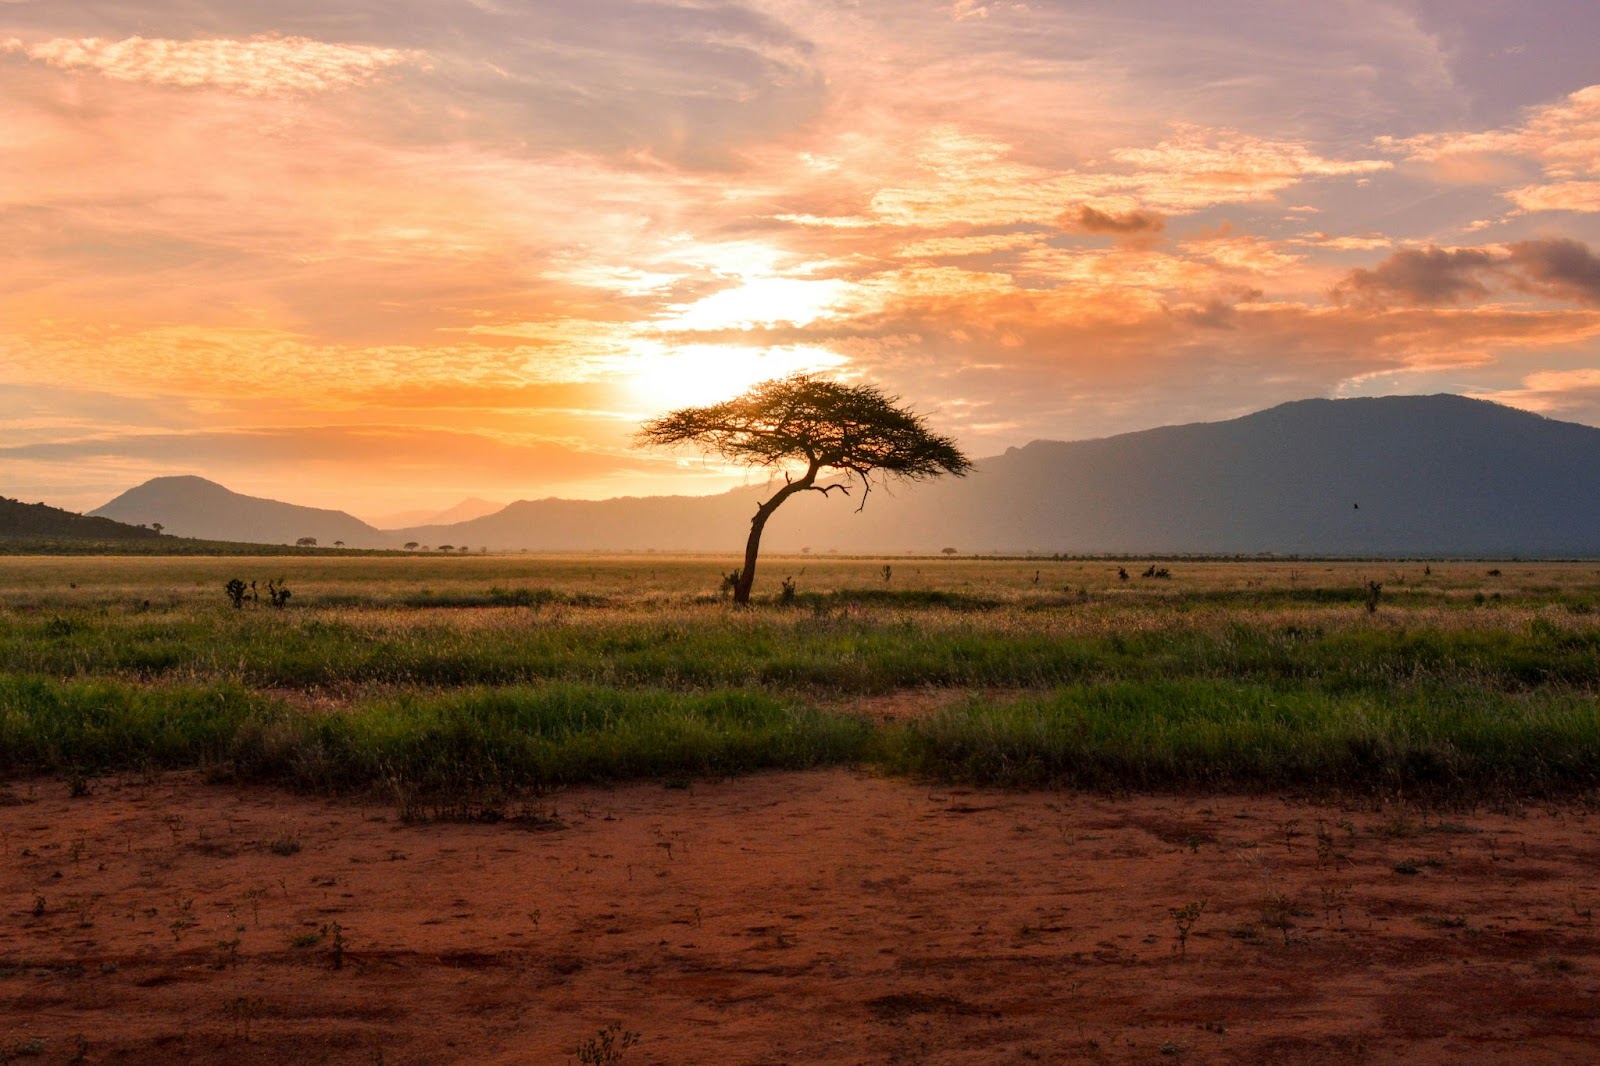 The weather is one of the reasons that July is the best times to visit Kenya.
pictured: a park of Kenya during sunset